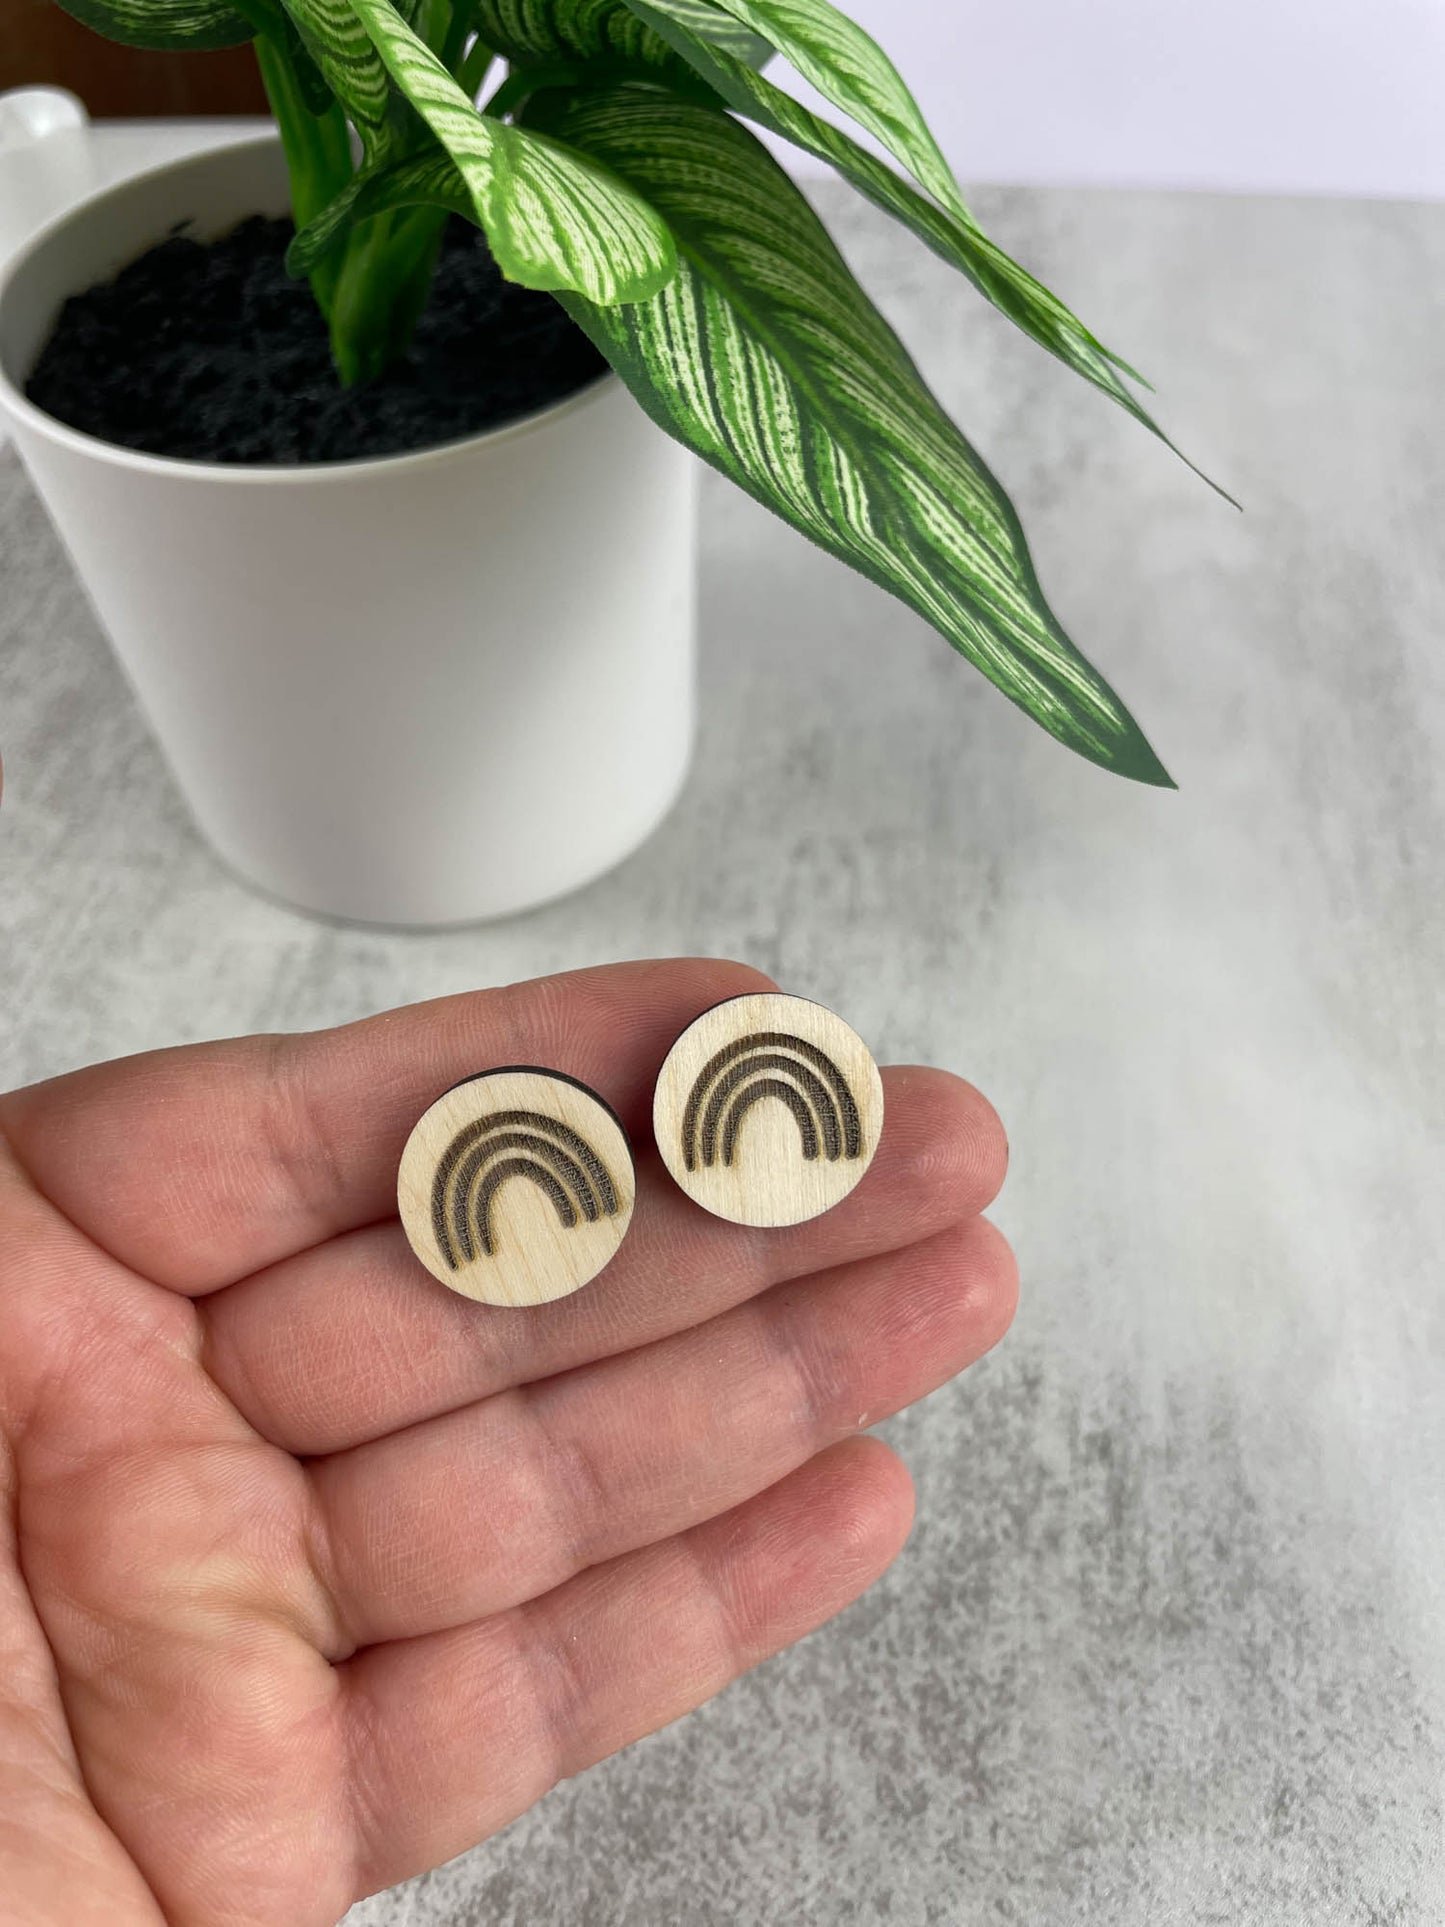 Rainbow Wooden Stud Earrings - Handcrafted Nature-inspired Jewelry | Apple Falls Prints